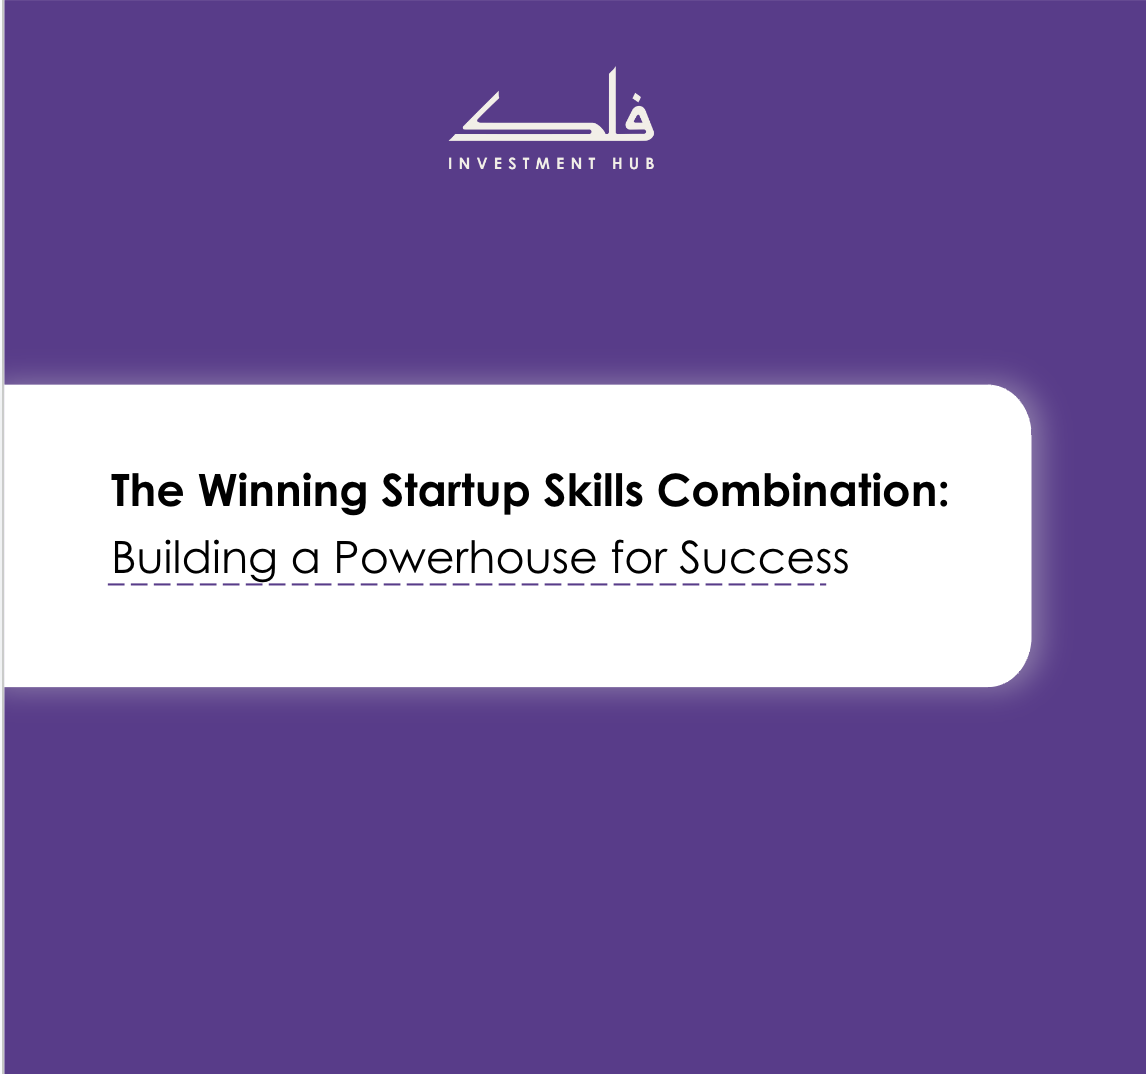 The Winning Startup Skills Combination: Building a Powerhouse for Success